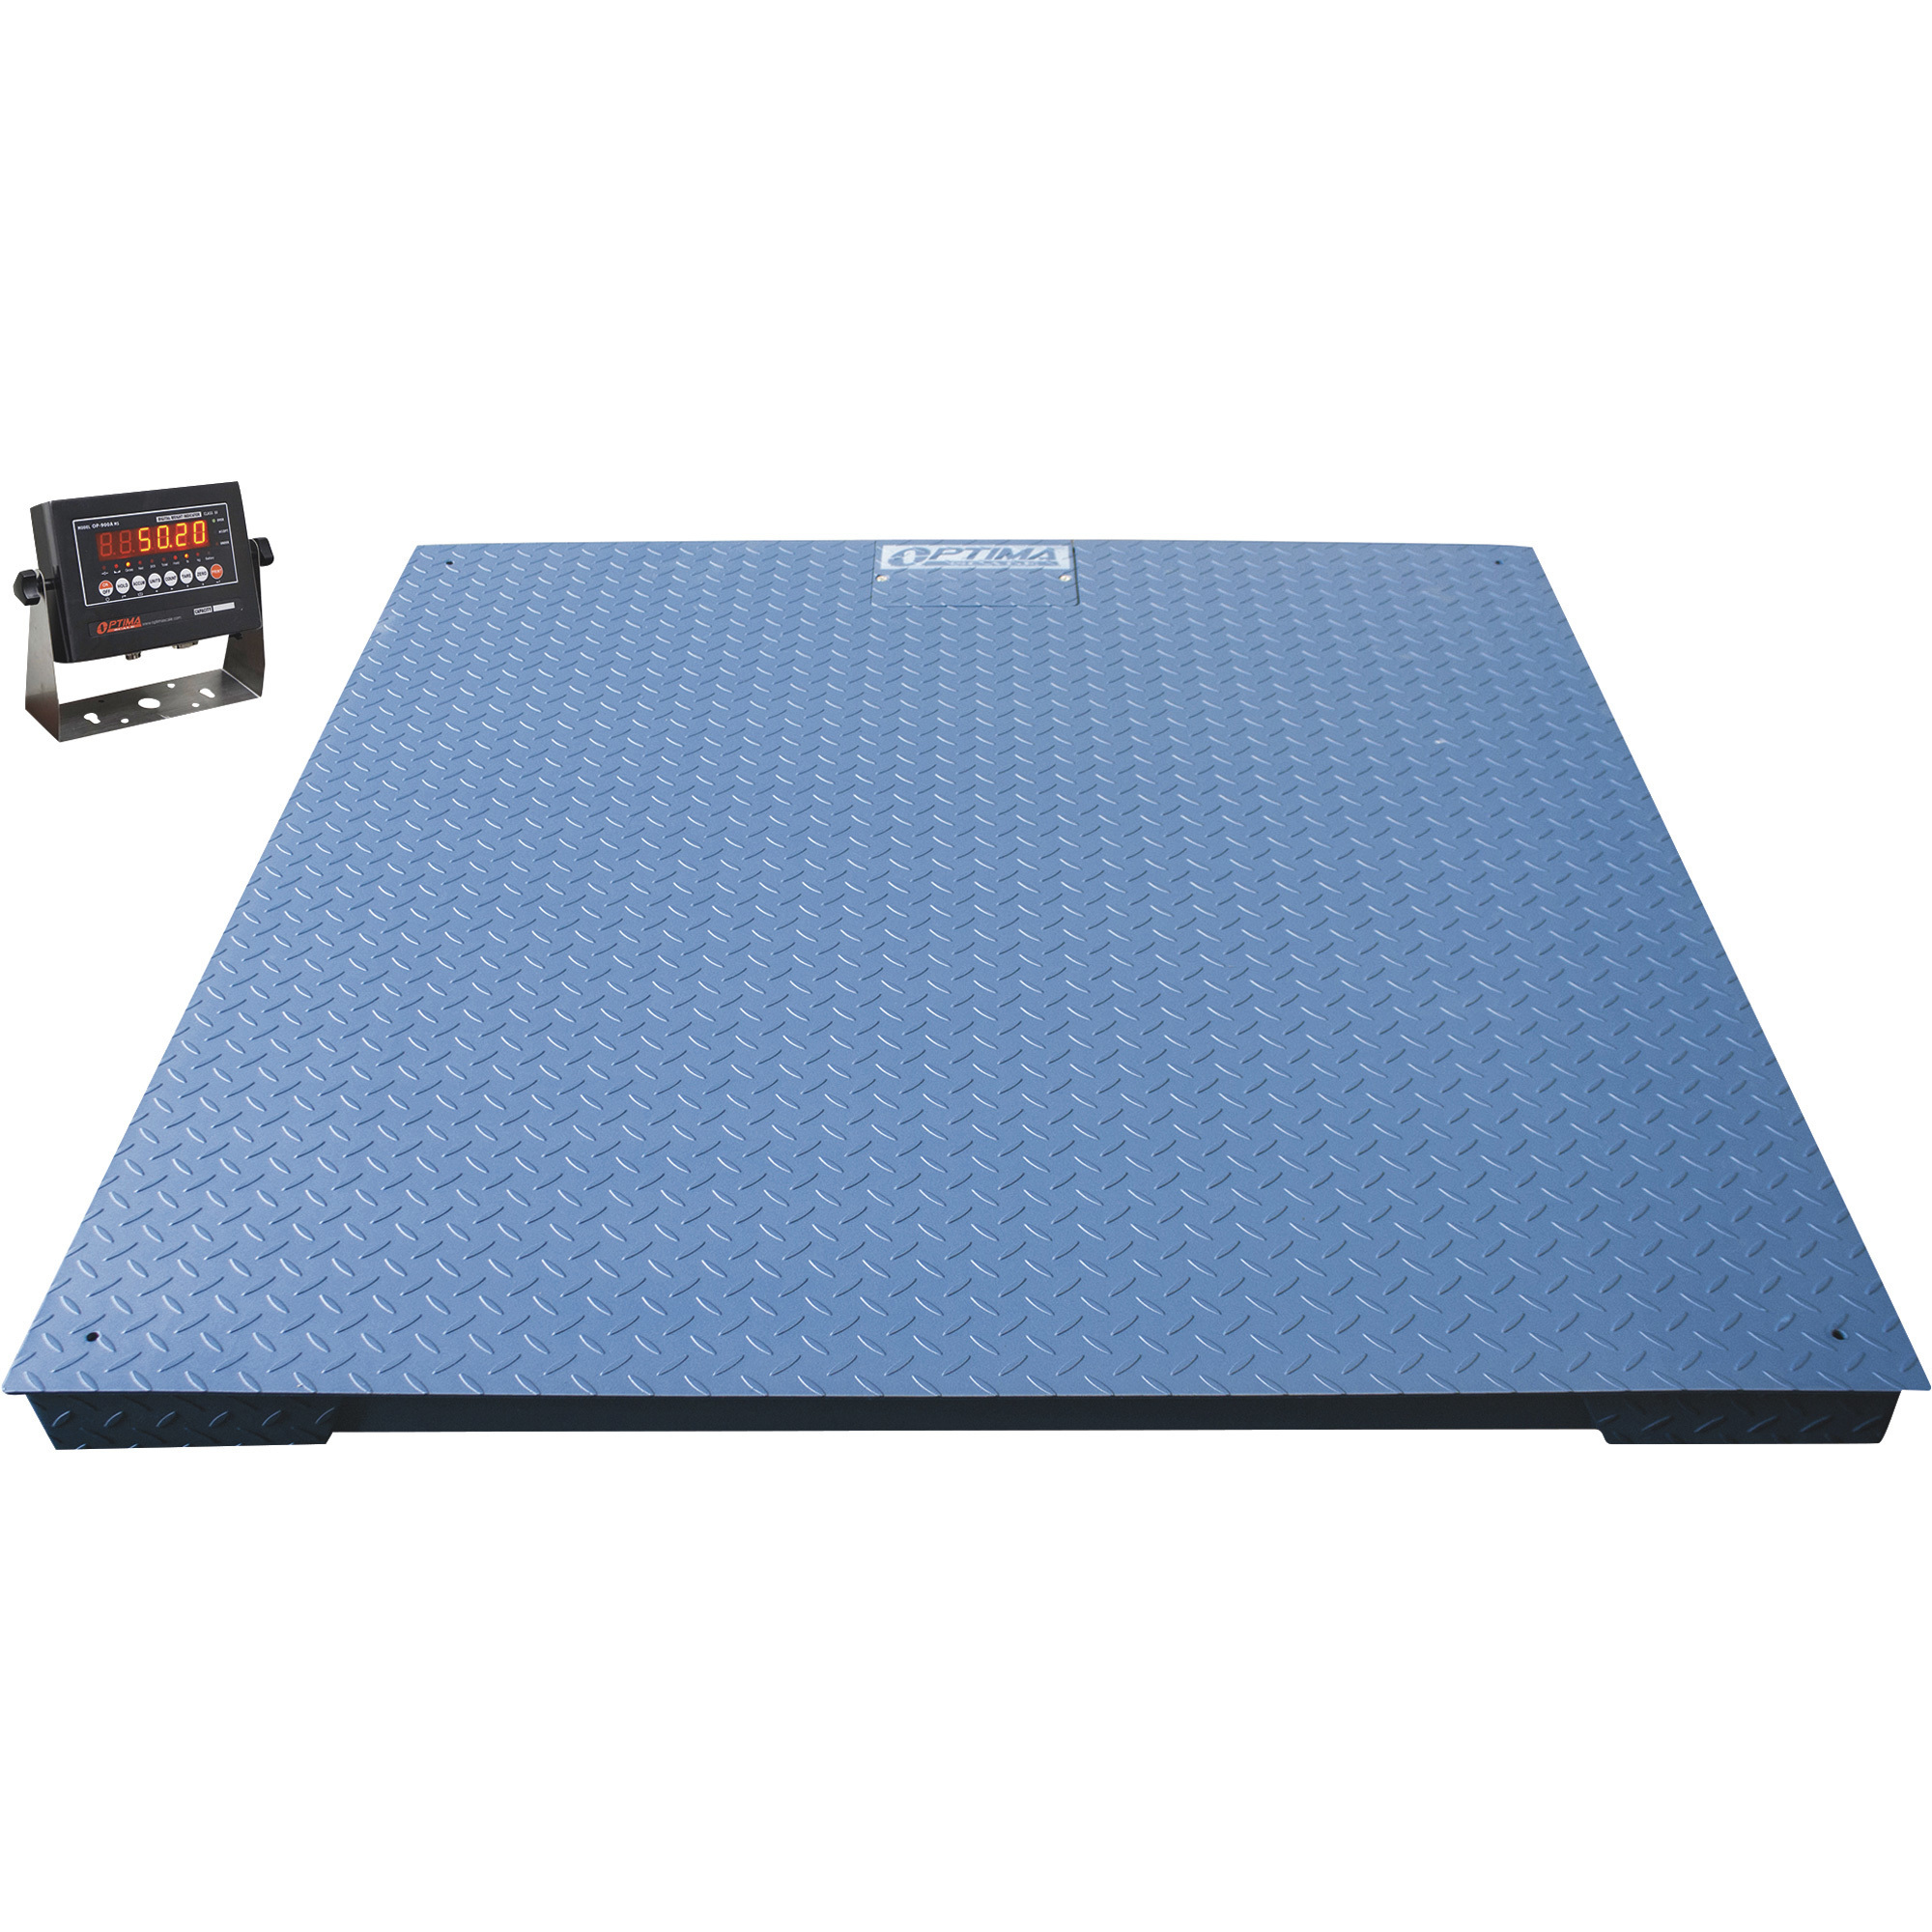 Optima Scale 36Inch x 36Inch Industrial Floor Scale — 5000-Lb. Weight Capacity, 1-lb. Display Increments, Model OP-916-3X3-5K -  OptimaScale